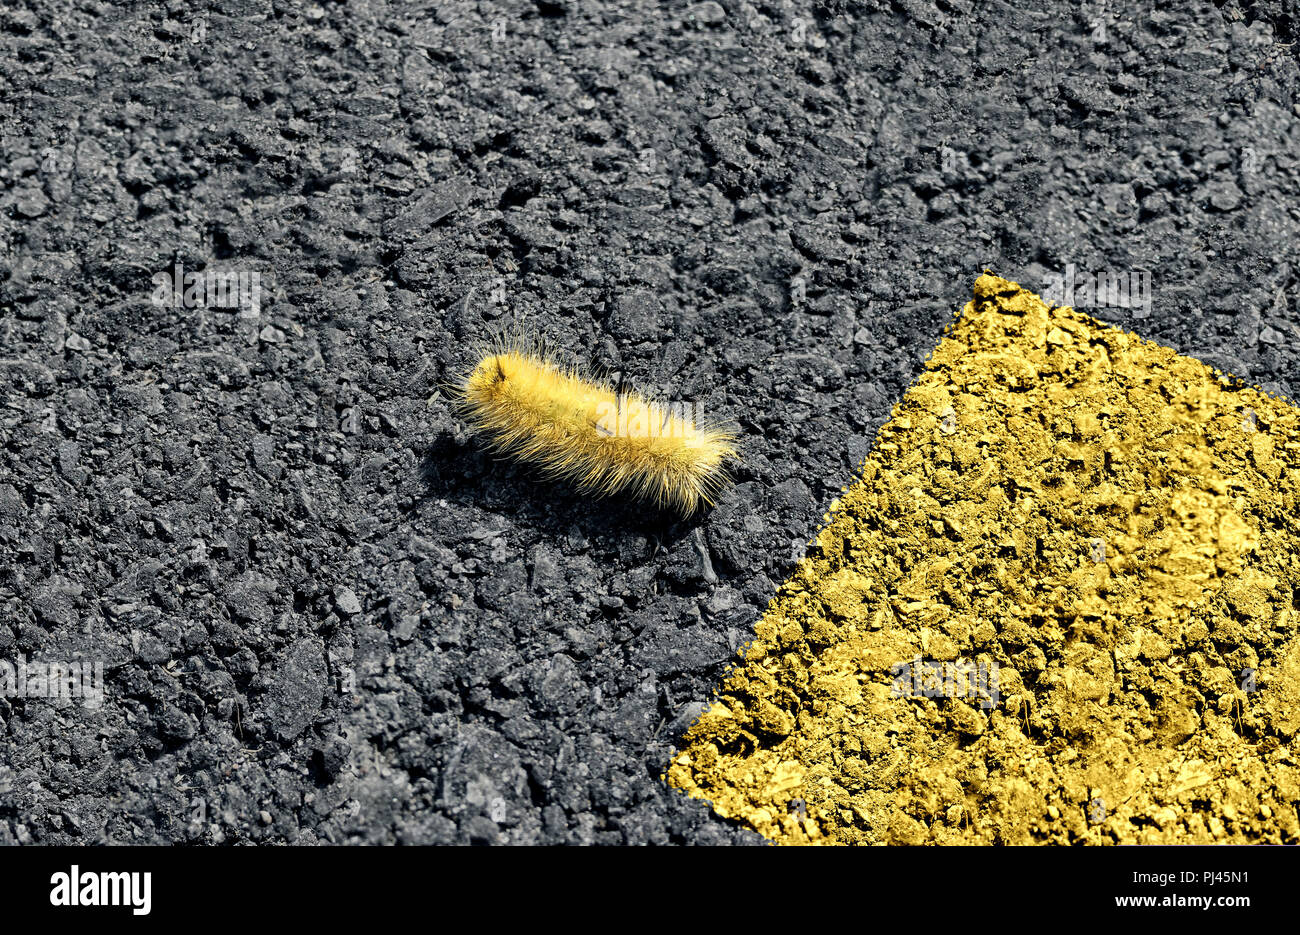 Danger and safety concept as a caterpillar crossing a dangerous highway towards pinted street lines as a road safety symbol. Stock Photo